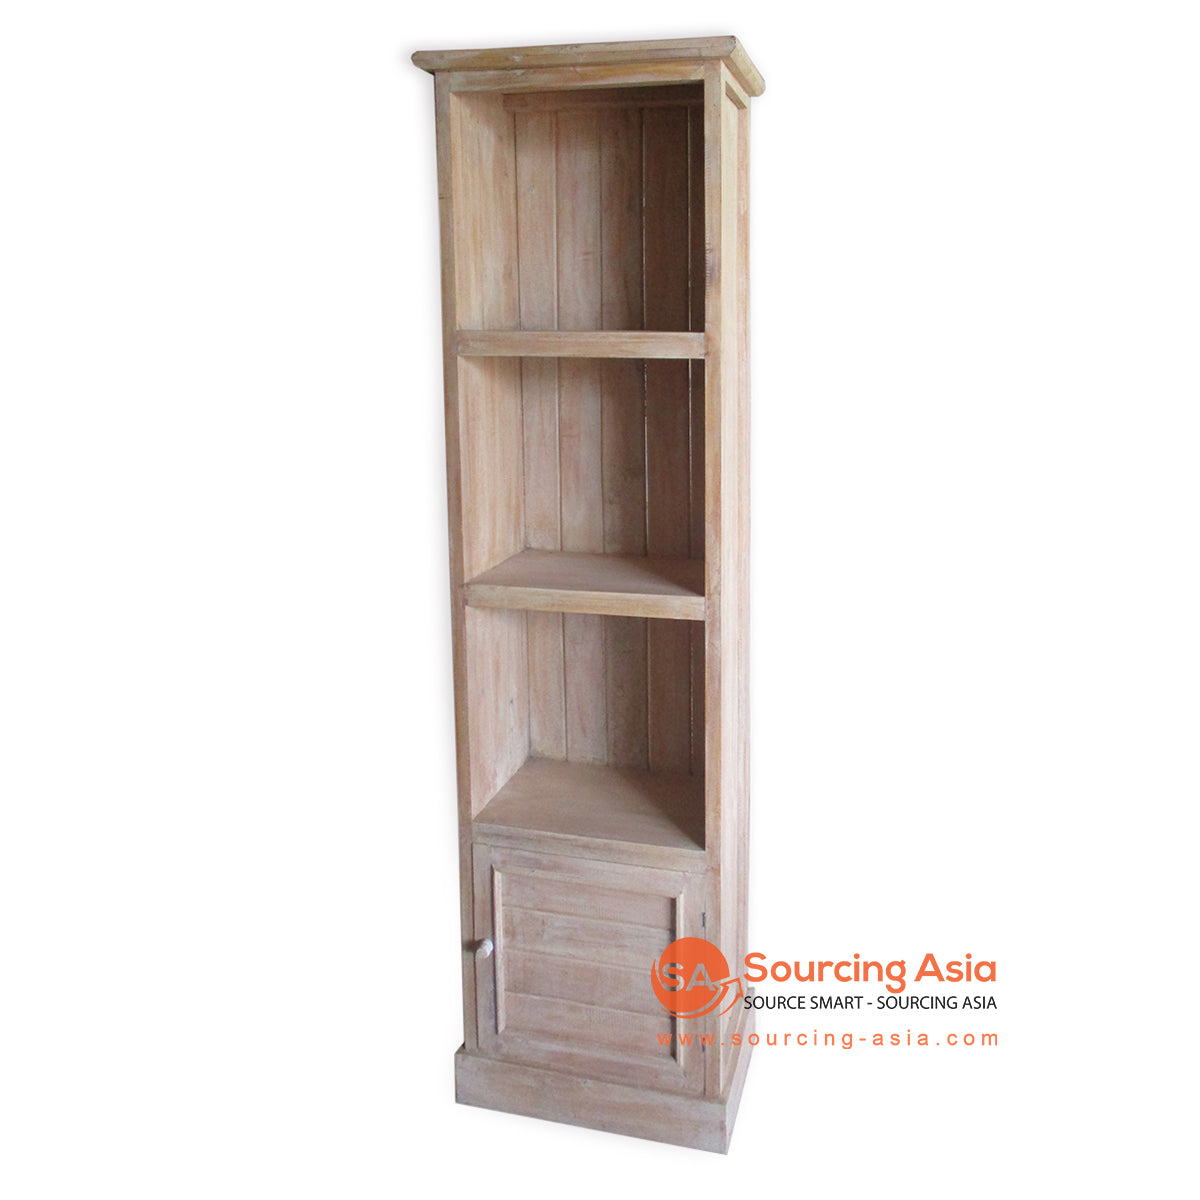 THE141BW BROWN WASH WOODEN BOOK RACK WITH THREE SLOTS AND DRAWER